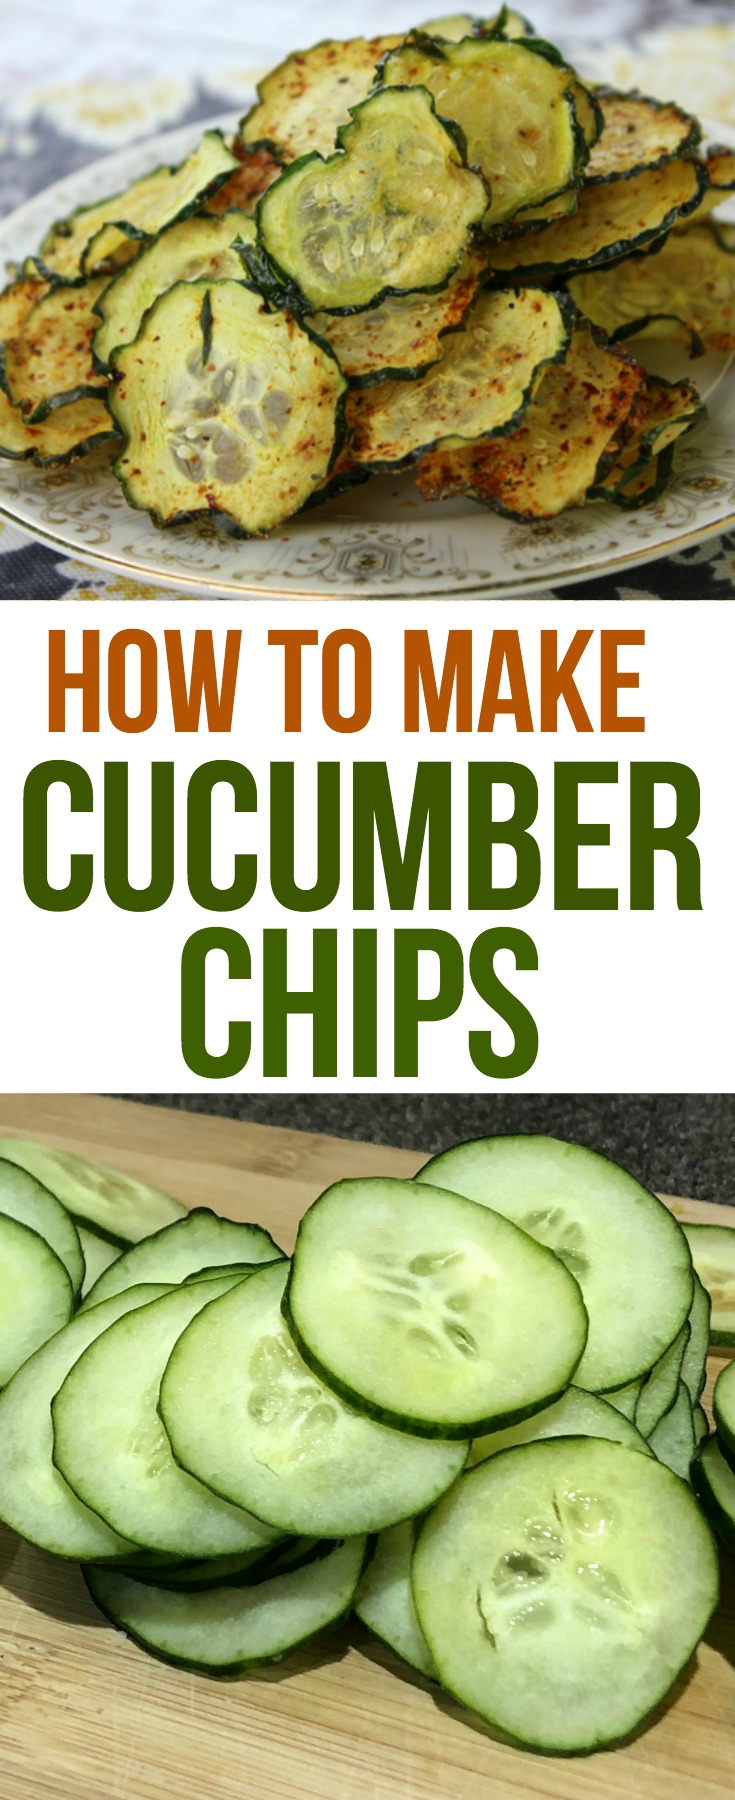 Cucumber Chips are easy to make and are delicious and healthy at the same time. They are the perfect snack for kids and adults.